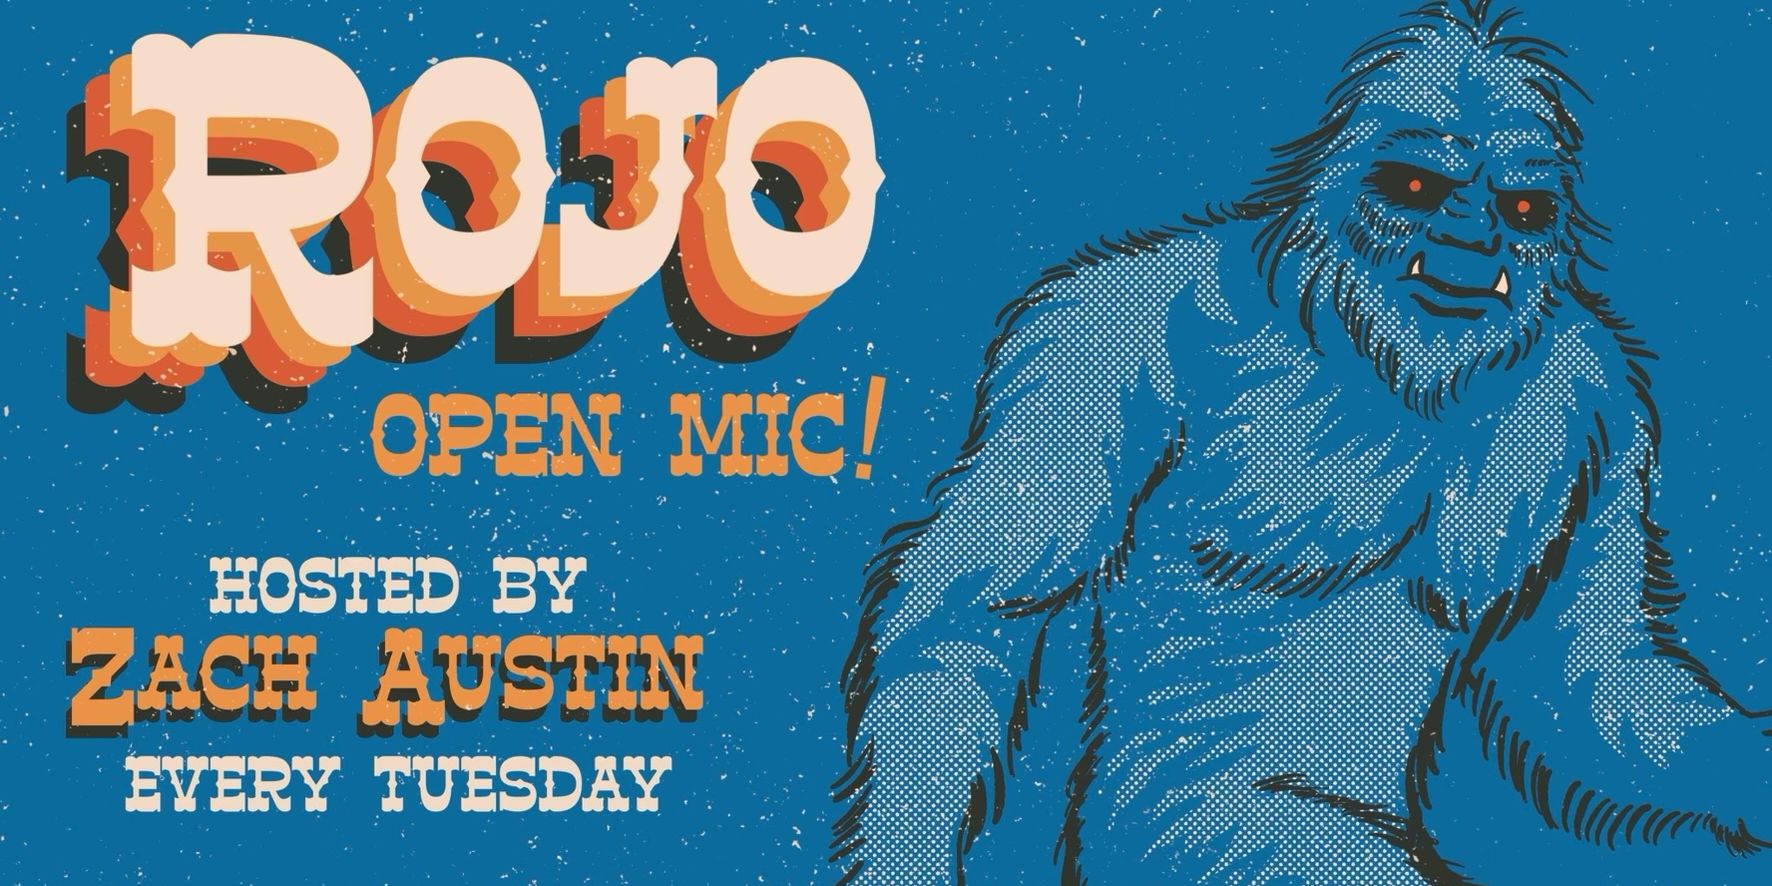 Open Mic Music promotional image